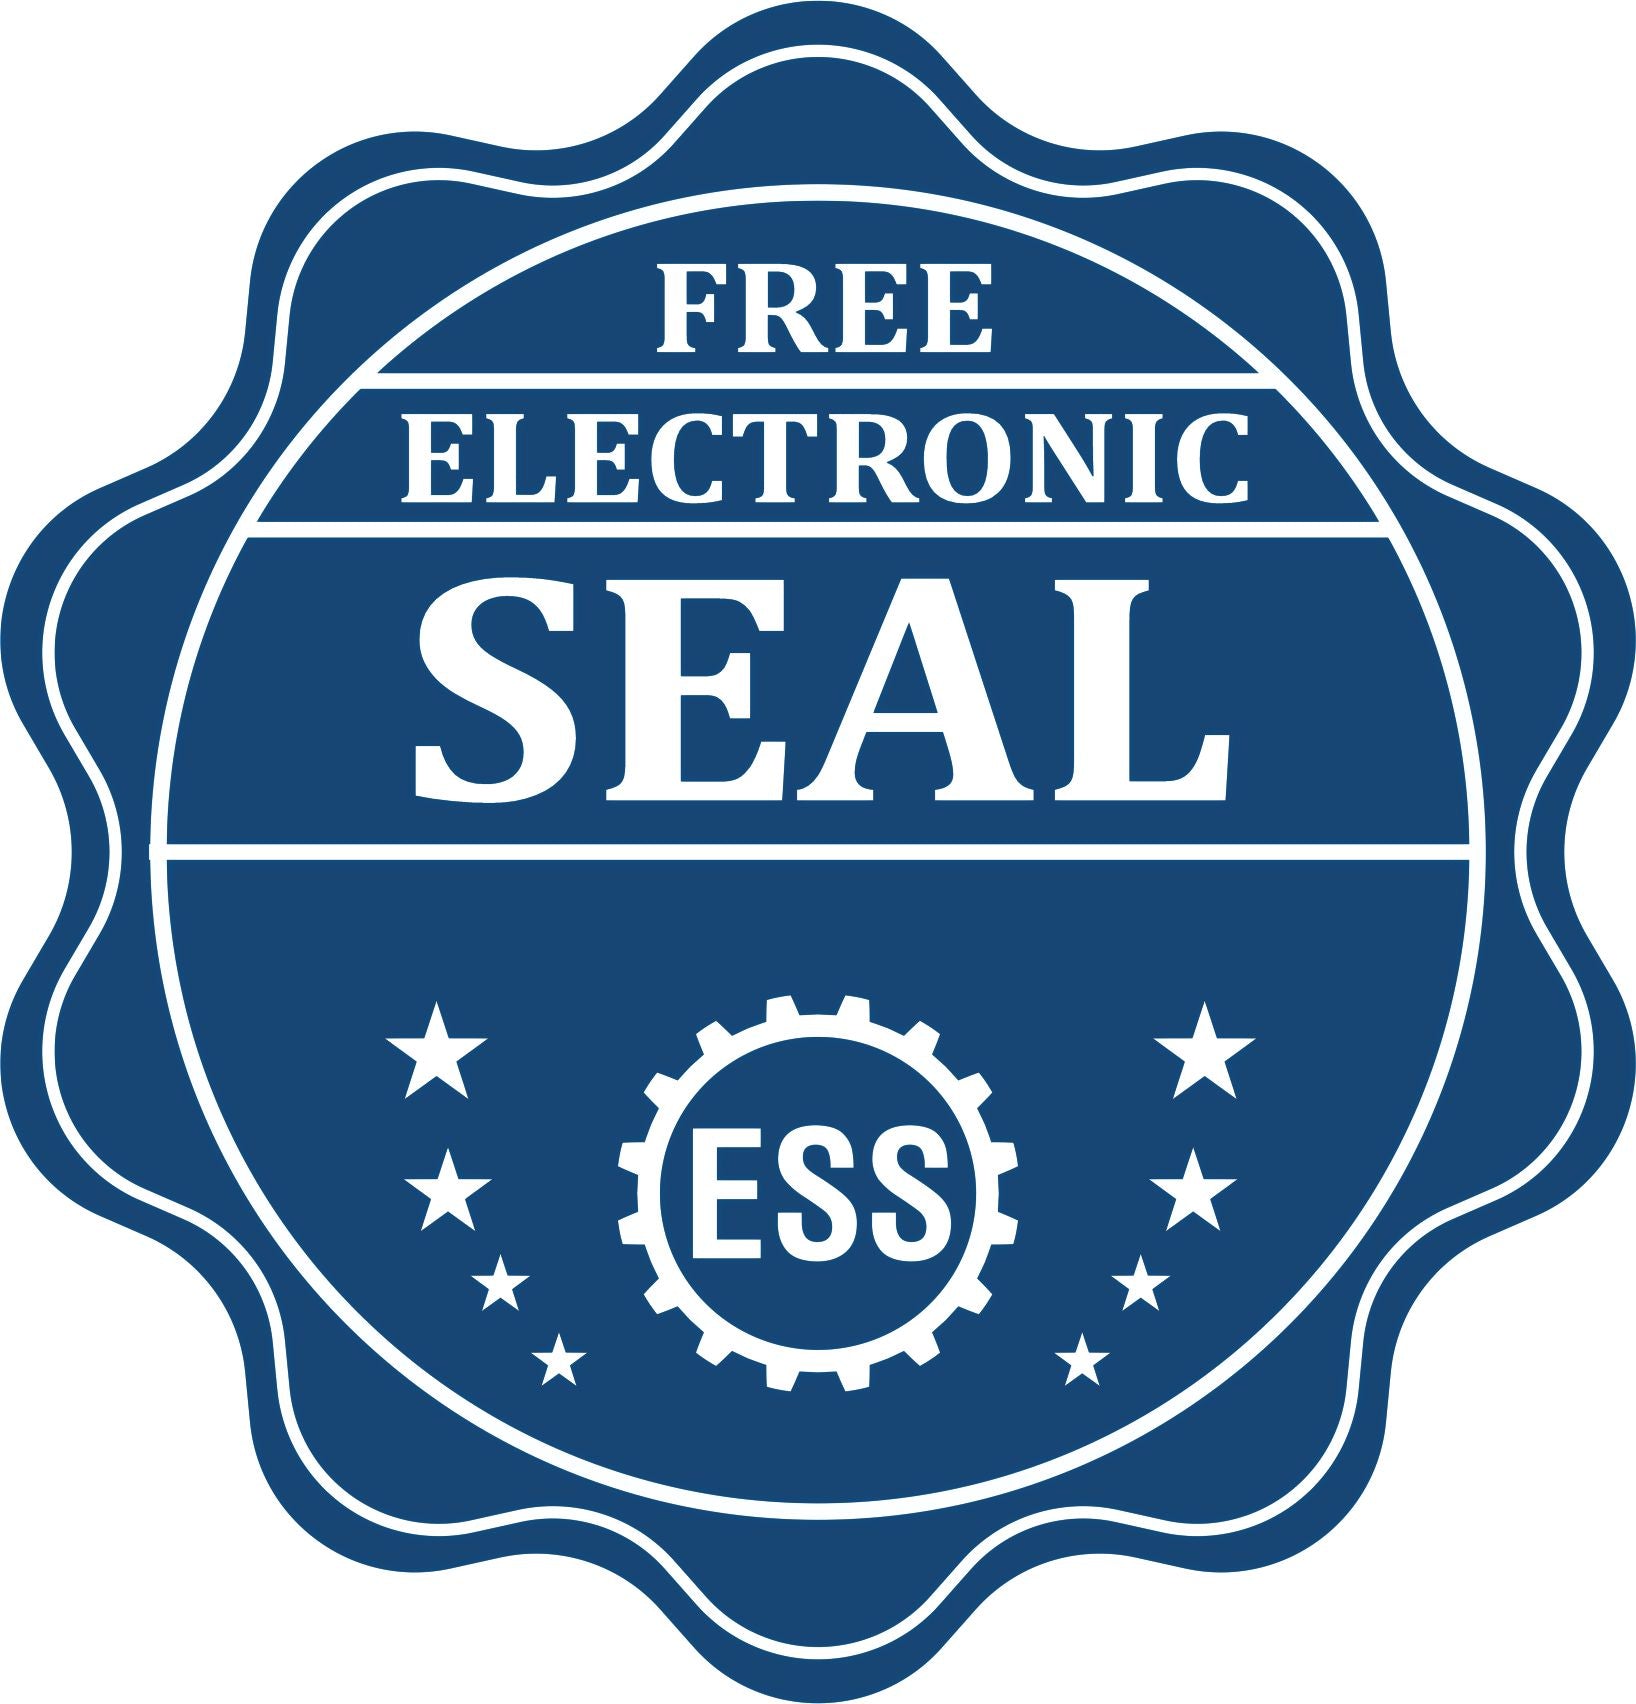 A badge showing a free electronic seal for the Premium MaxLight Pre-Inked District of Columbia Geology Stamp with stars and the ESS gear on the emblem.